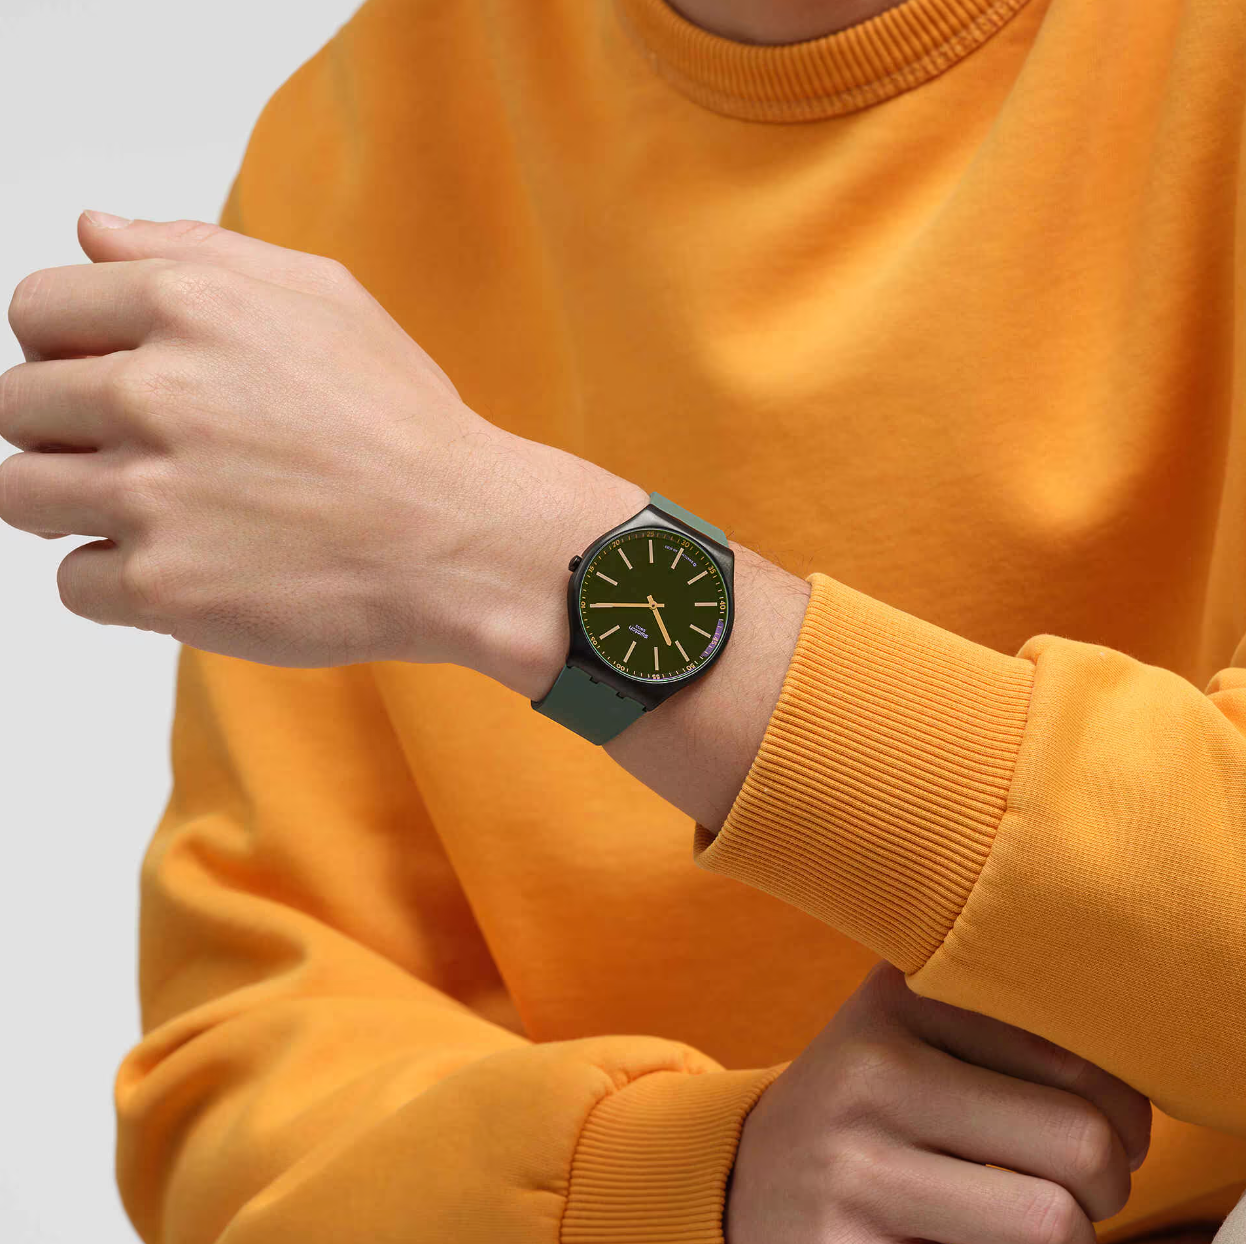 Montre Swatch Green Vision